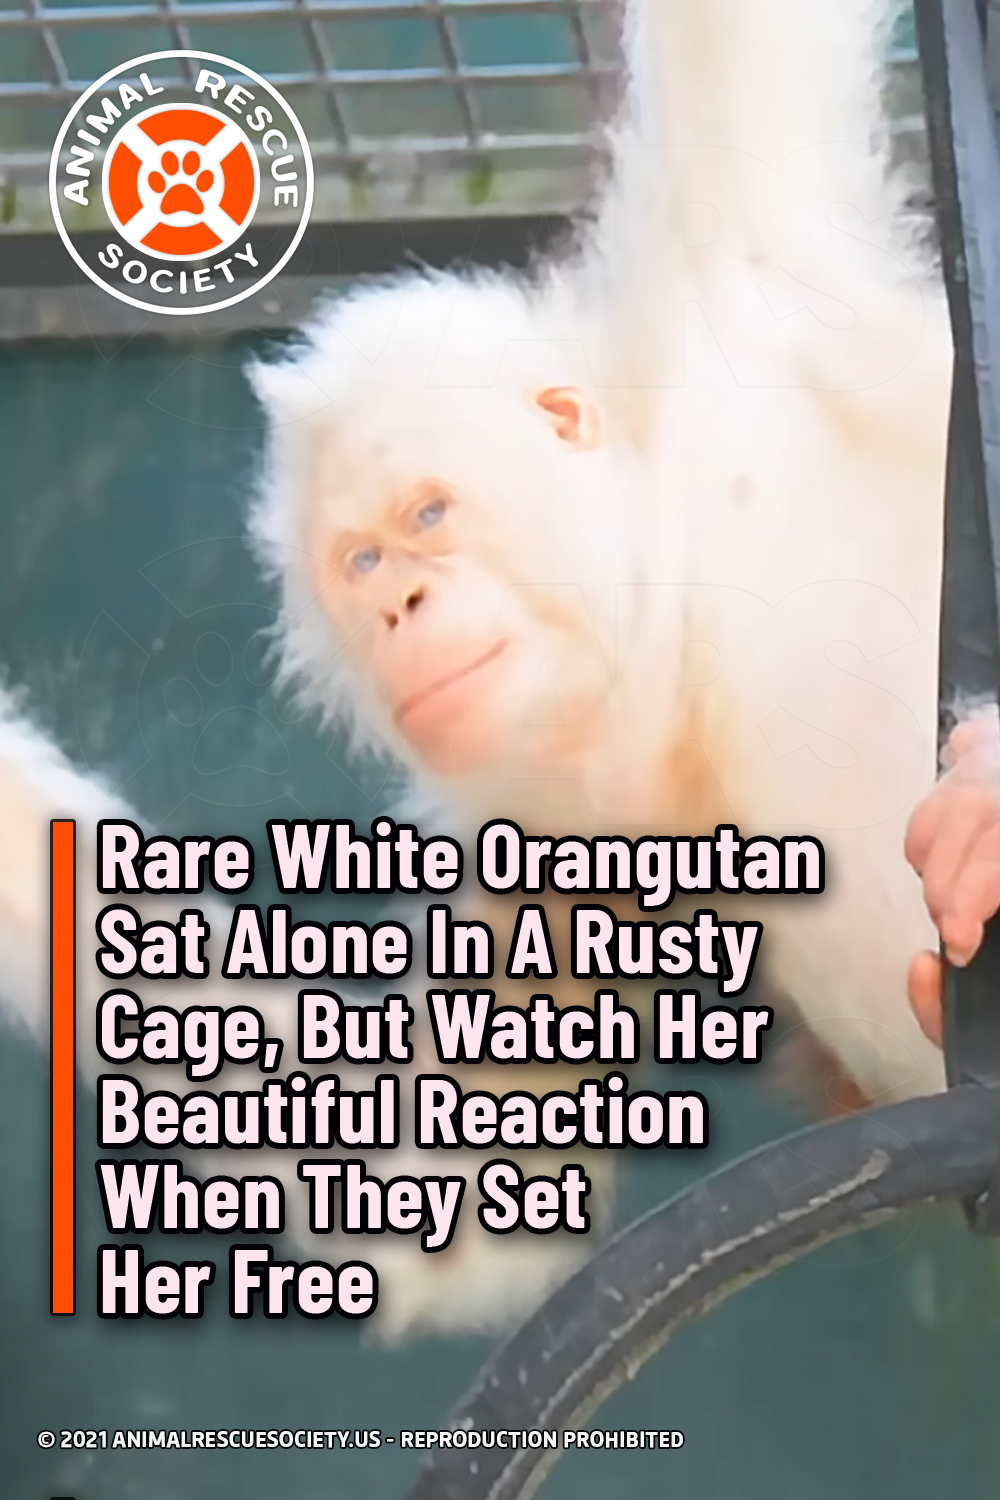 Rare White Orangutan Sat Alone In A Rusty Cage, But Watch Her Beautiful Reaction When They Set Her Free